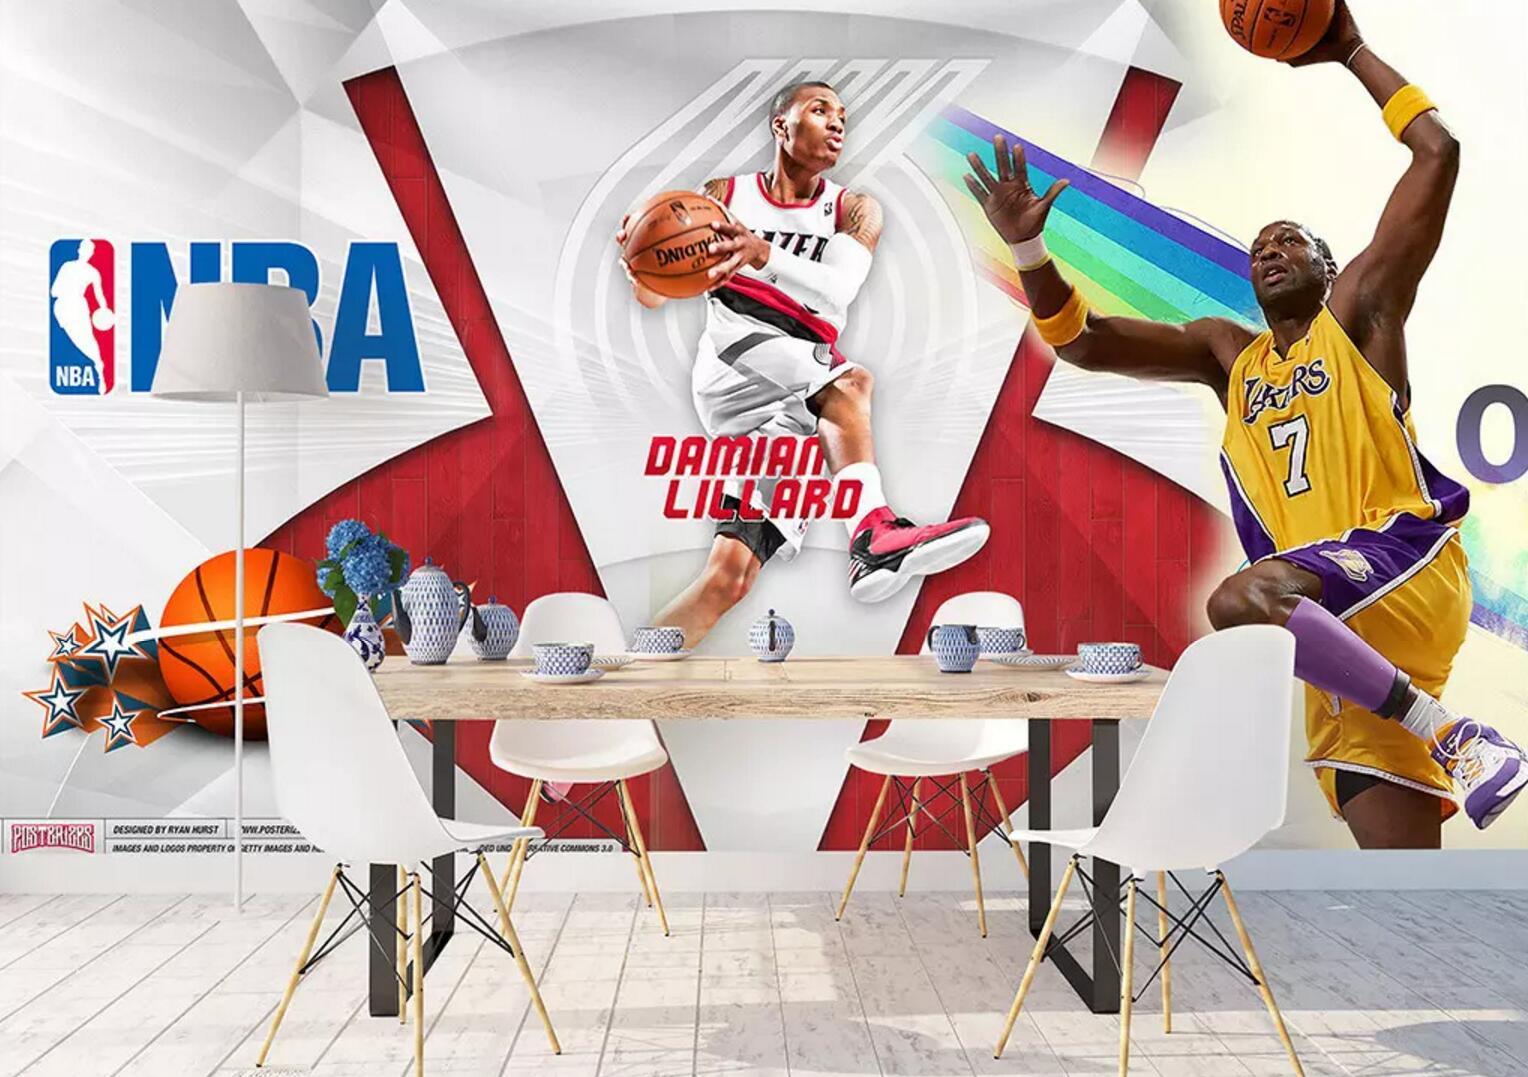 3D Athlete Shooting WC633 Wall Murals